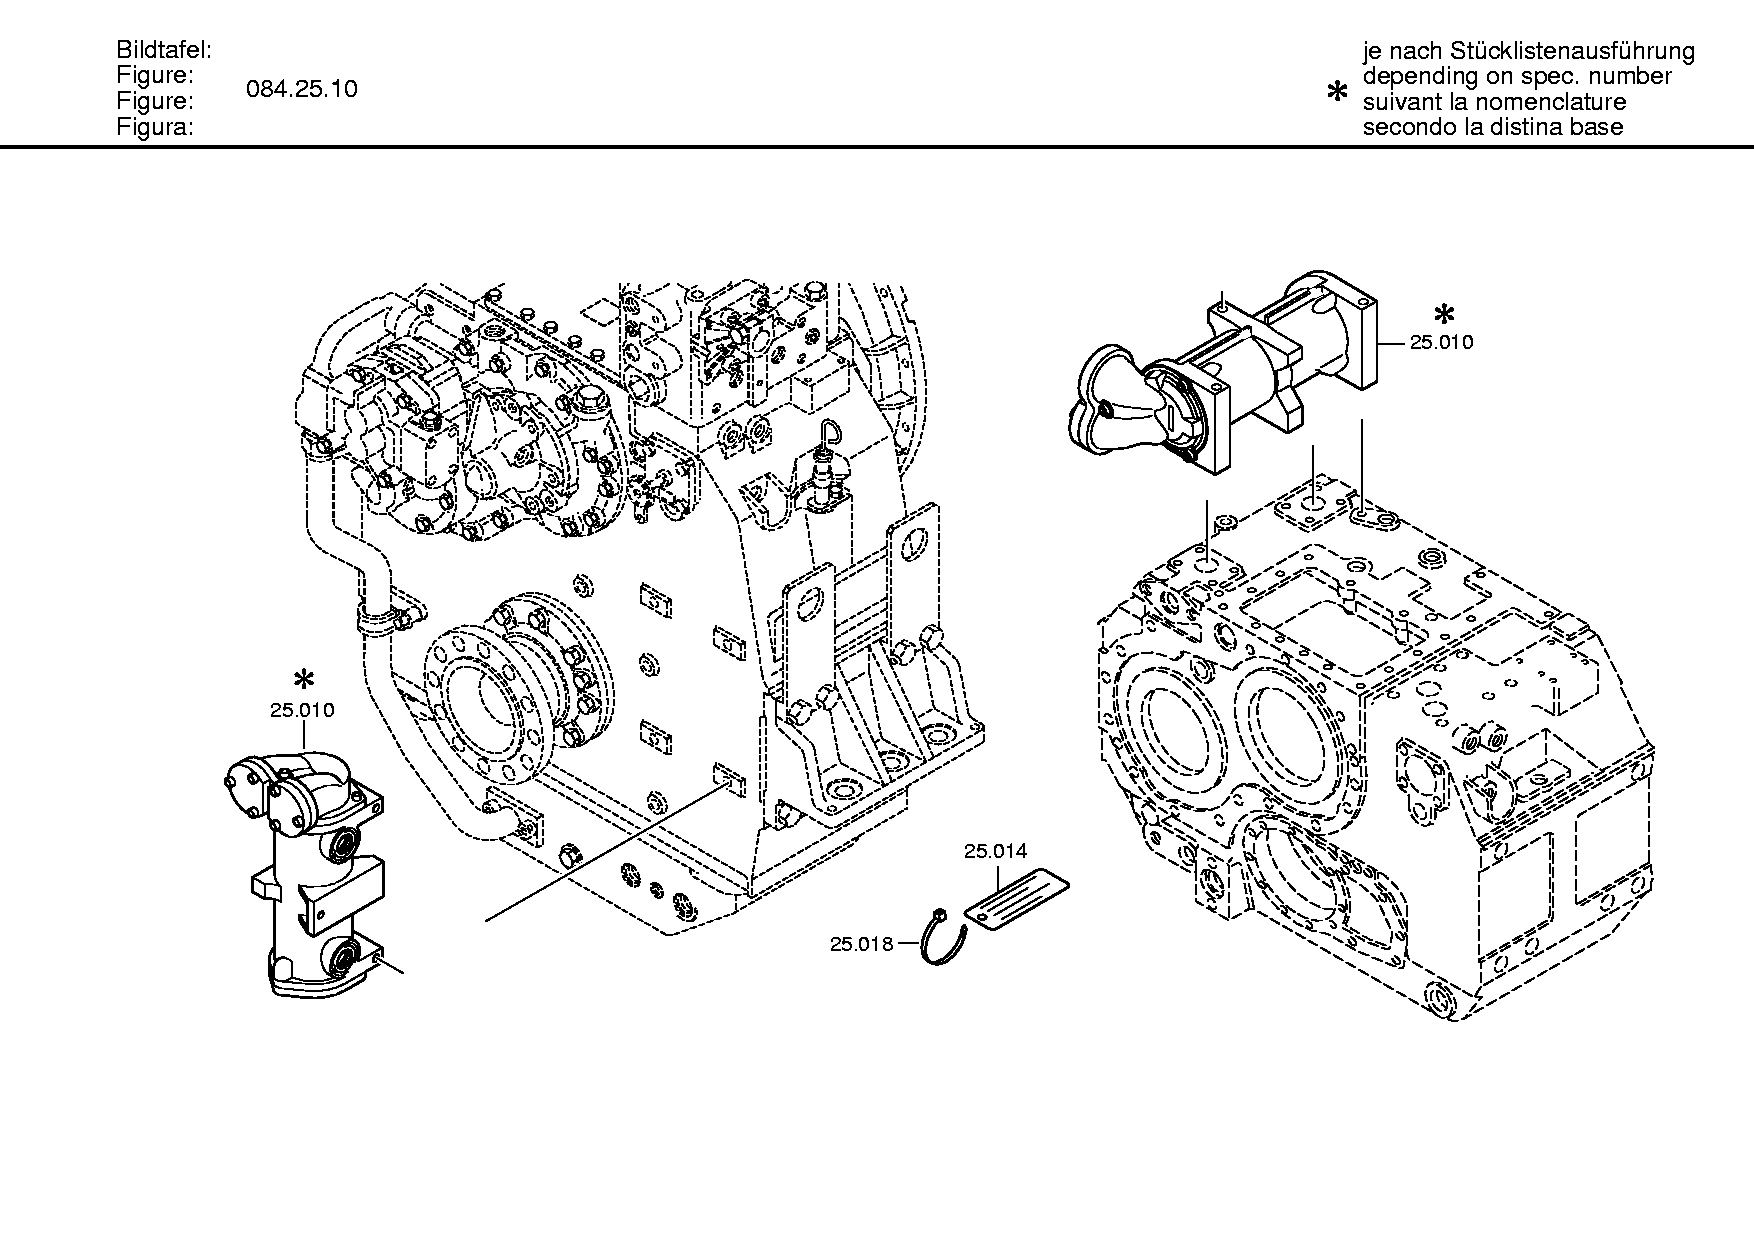 drawing for MOXY TRUCKS AS 352072 - O-RING (figure 4)